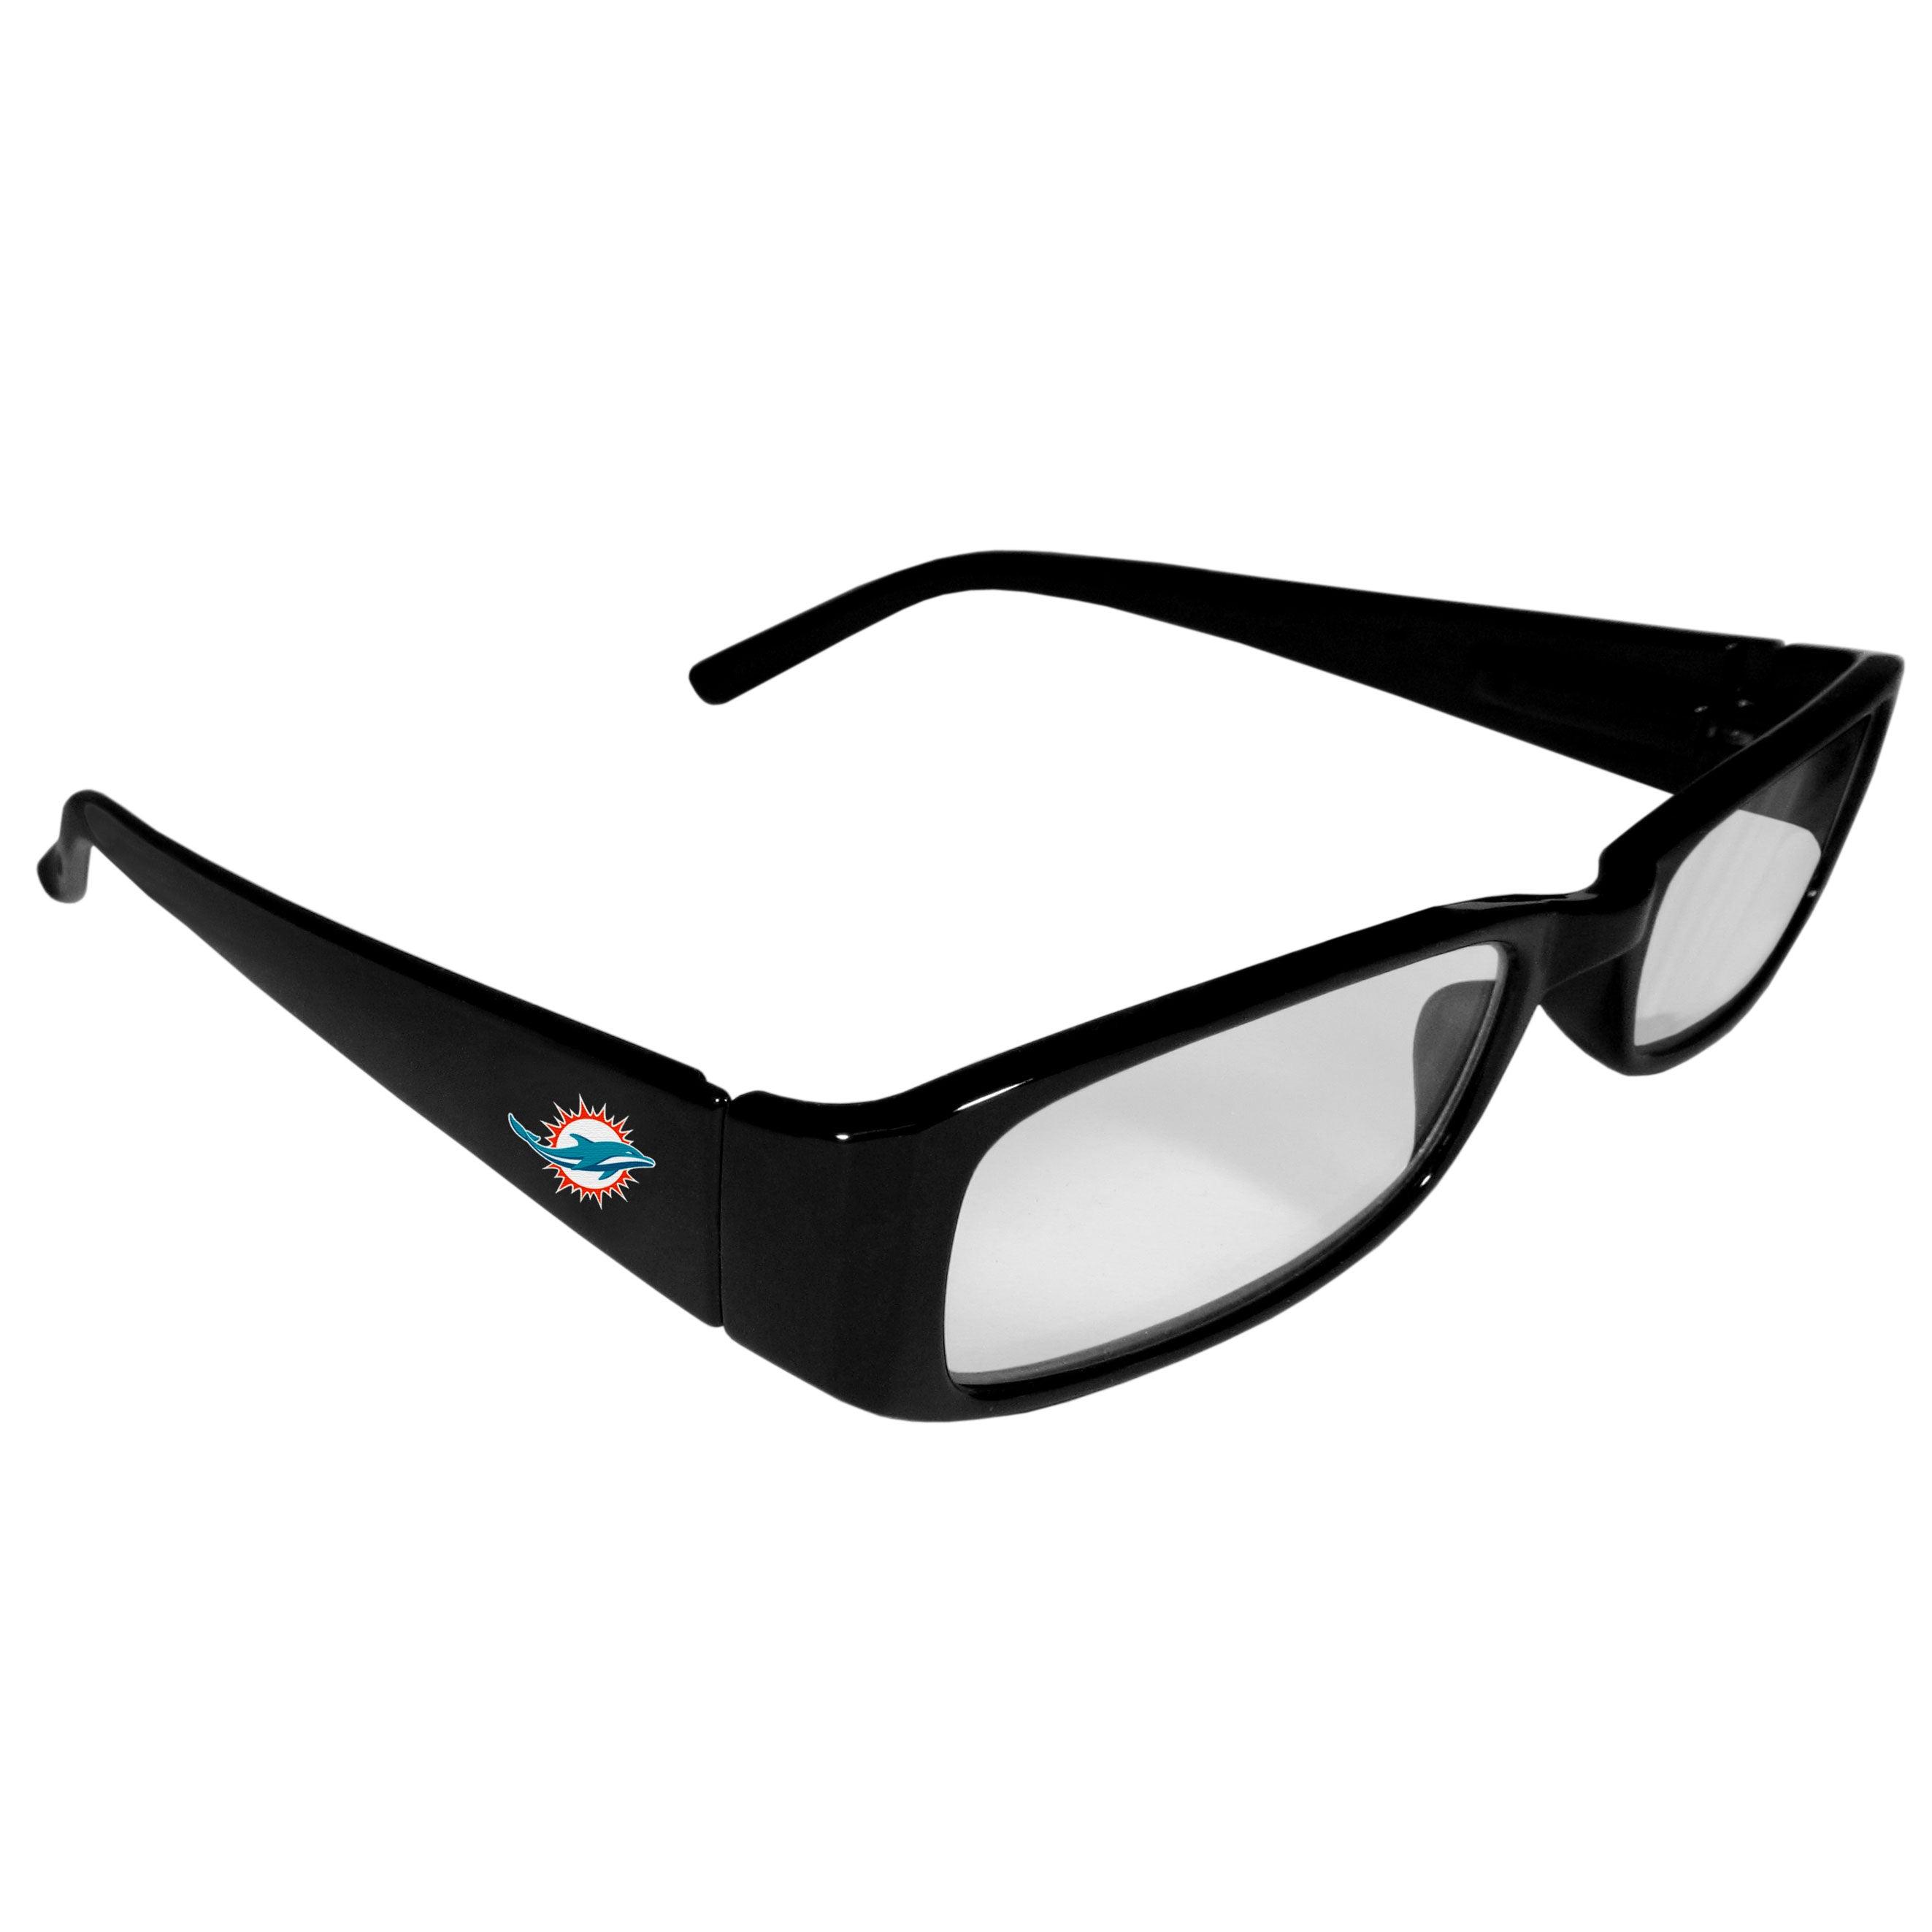 Miami Dolphins Printed Reading Glasses, +2.00 - Flyclothing LLC